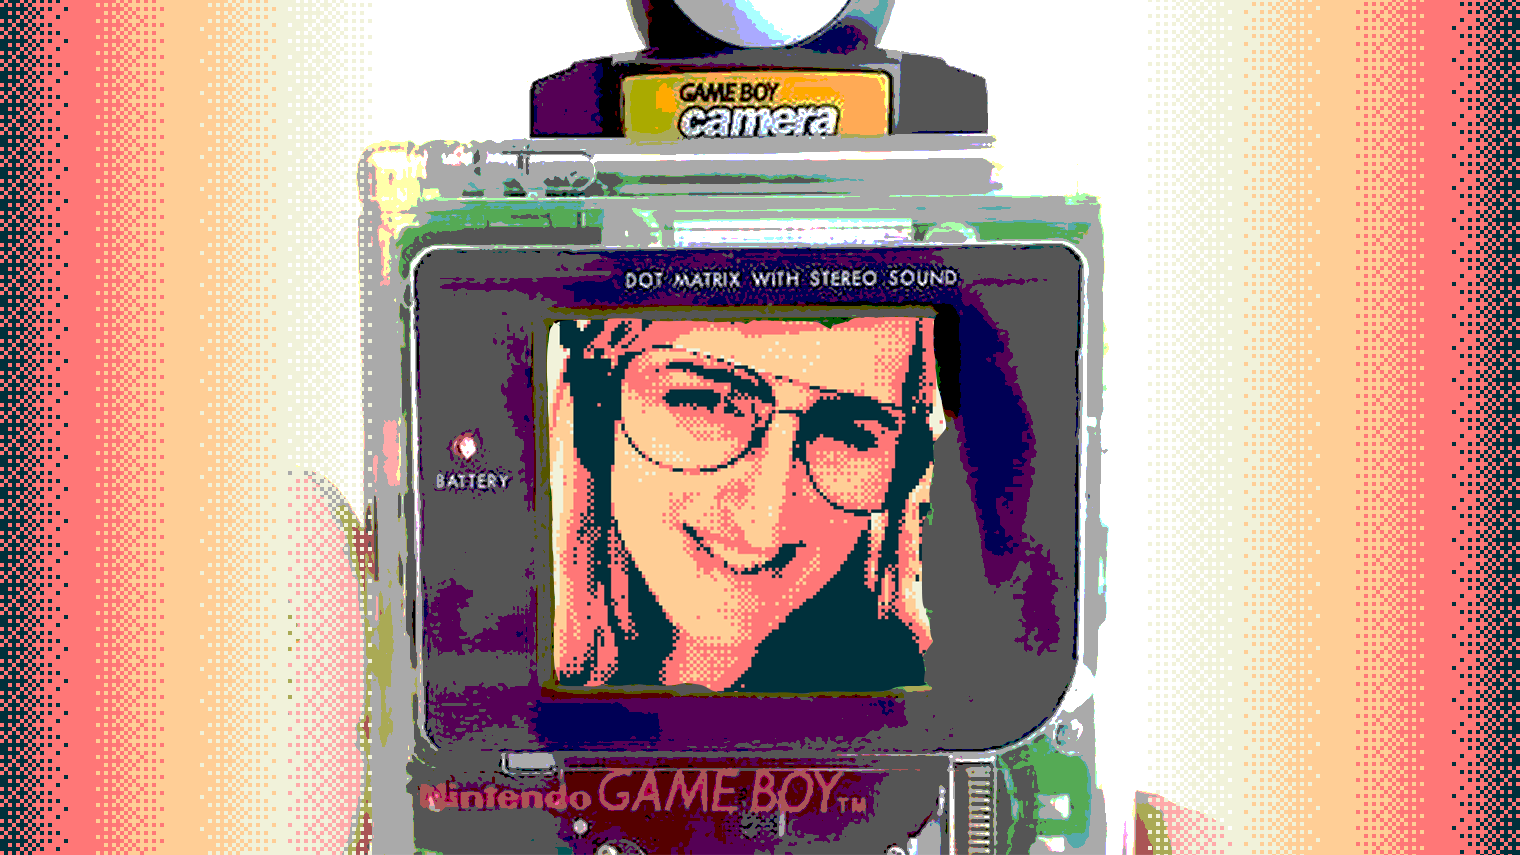 Concentratie Interpreteren Verandert in The Game Boy Camera, Or: How I Learned To Stop Worrying And Love The Pixels  | Hackaday